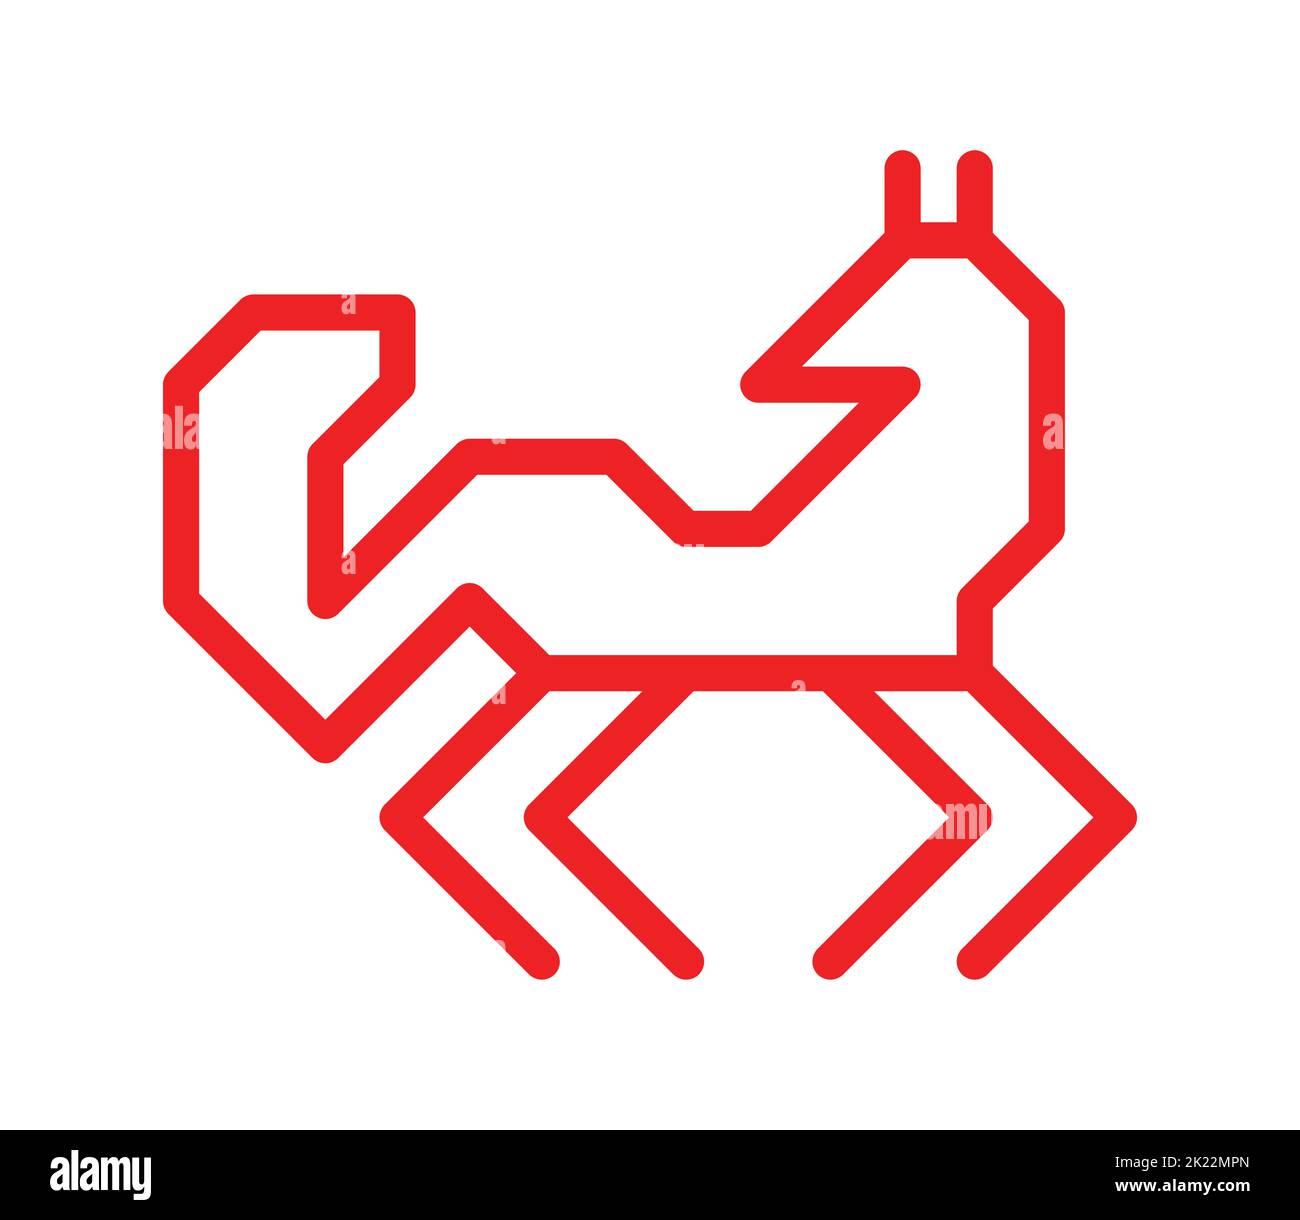 Vector isolated flat concept with red simplified pet symbol of Eskimo dog. Outline icon of traditional ornamental animal of Karelia and Finland people Stock Vector